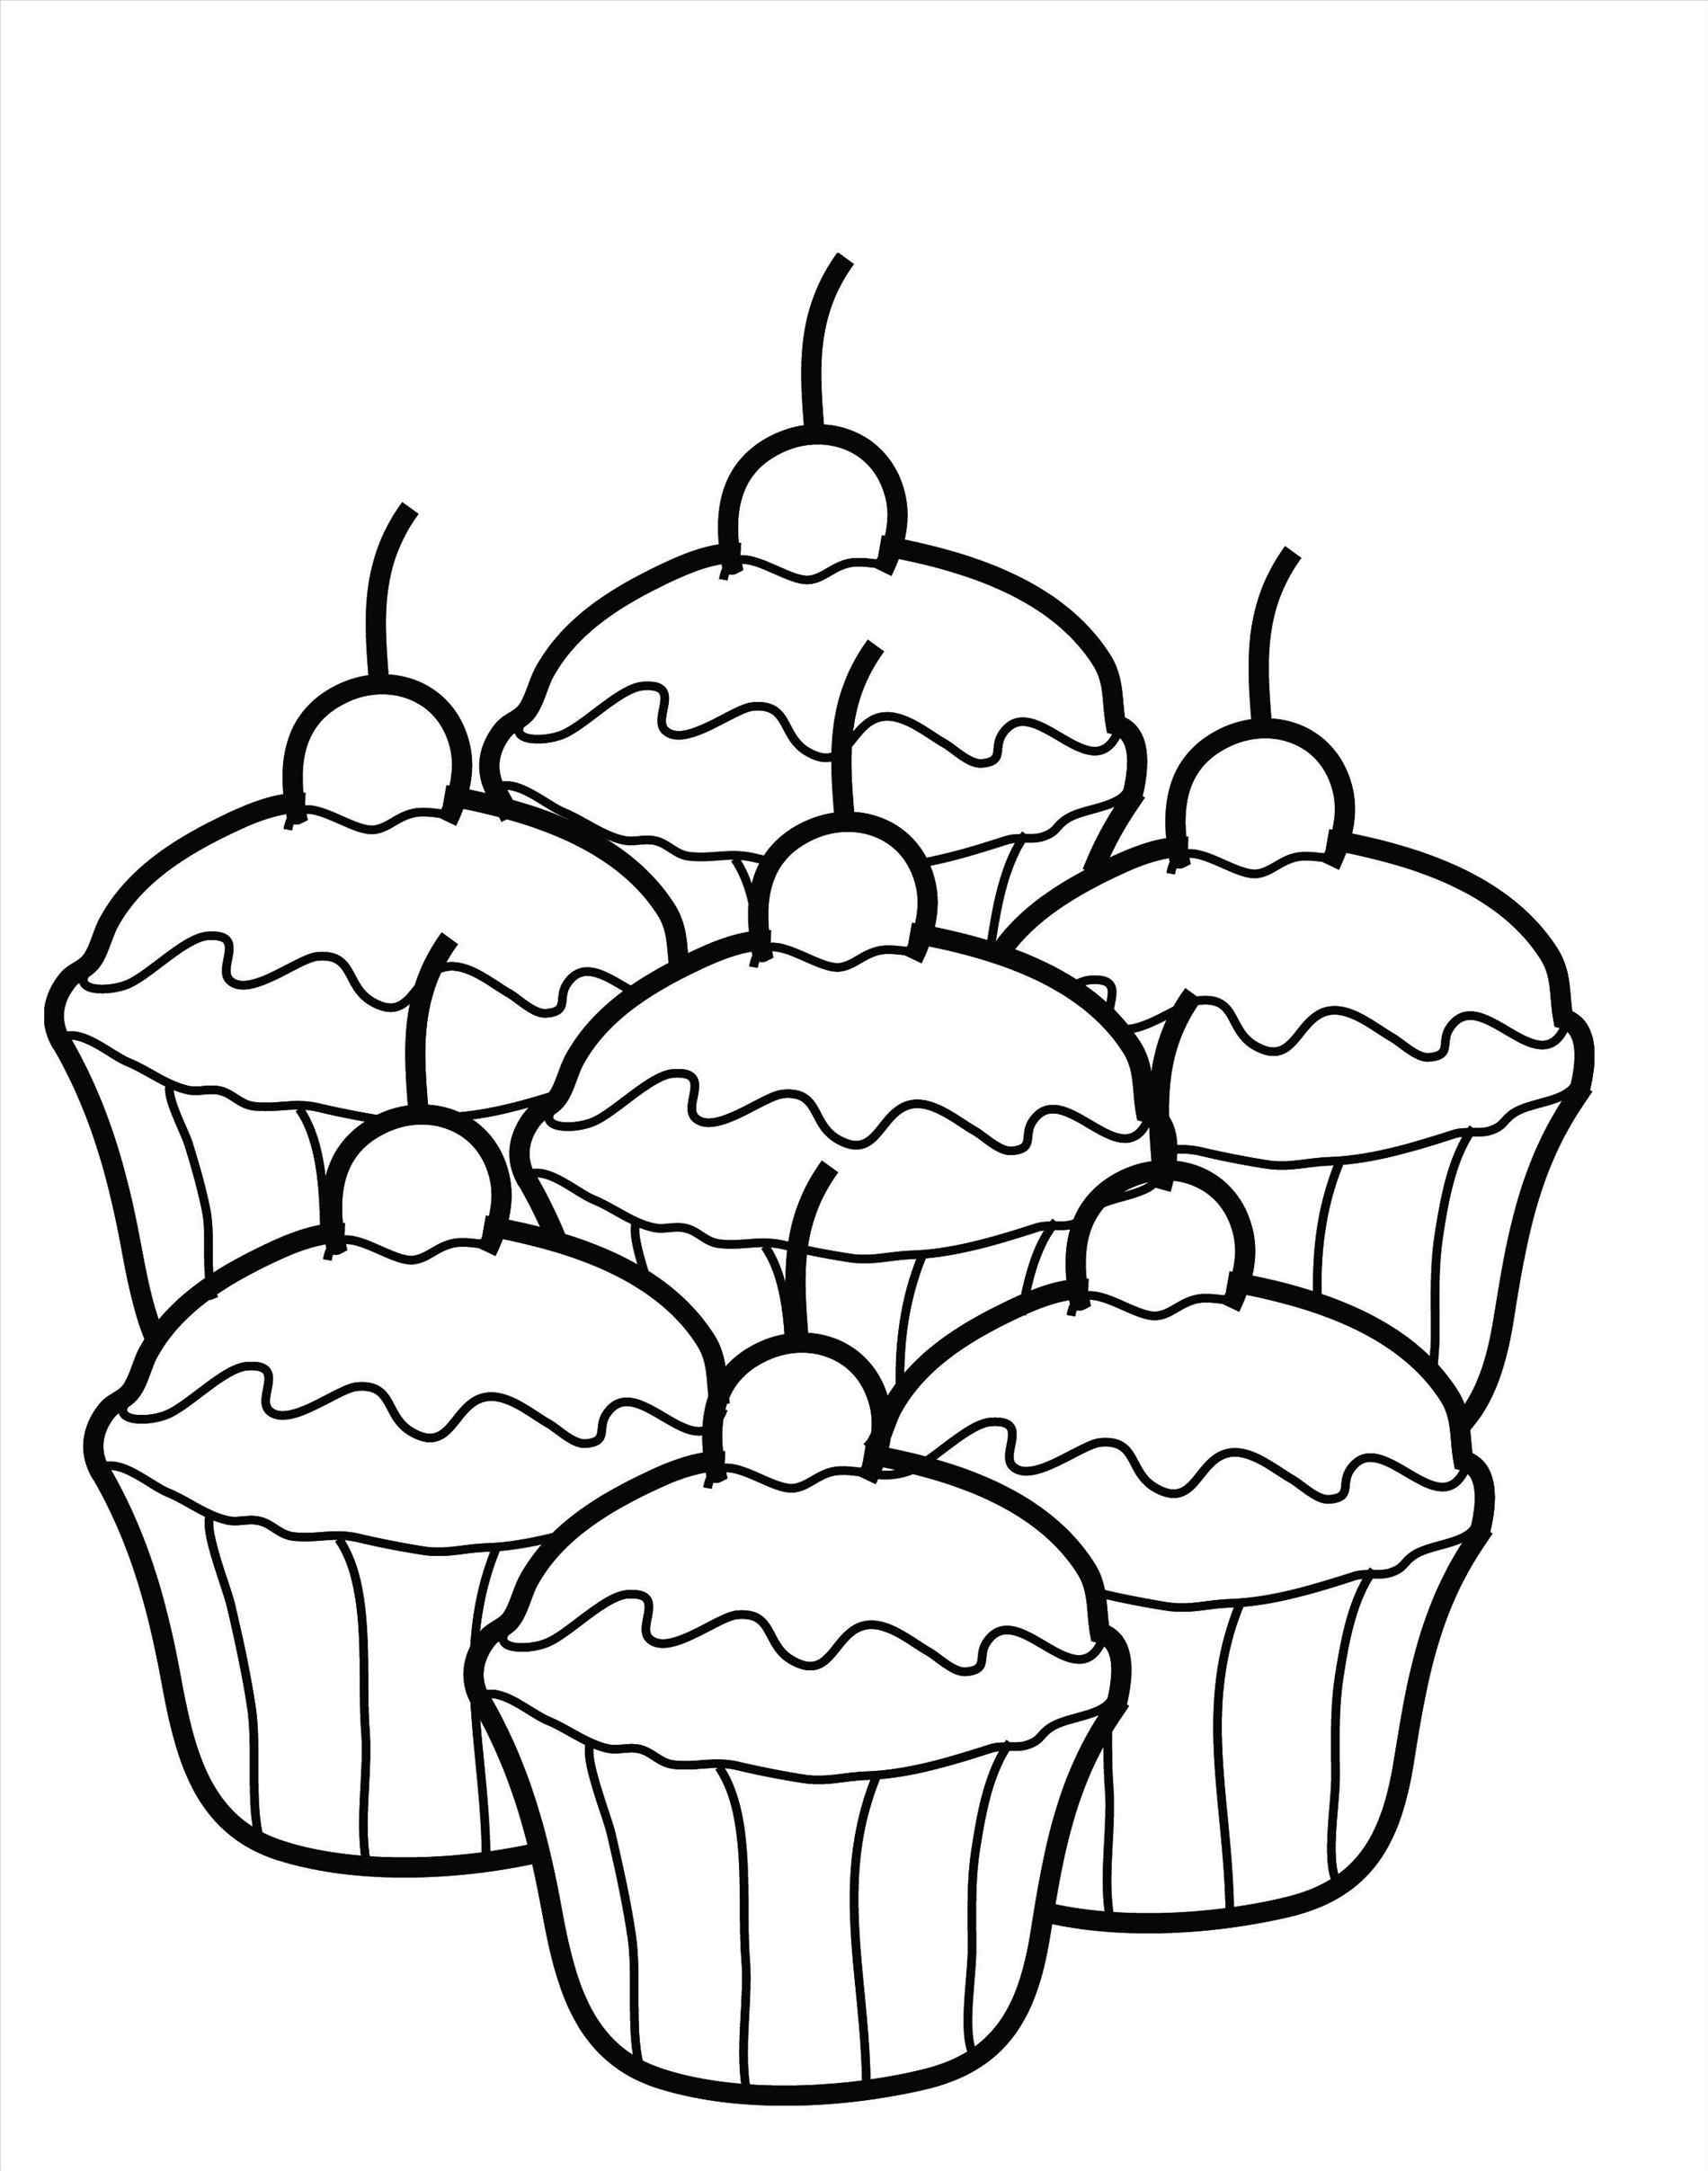 baked-goods-coloring-pages-at-getdrawings-free-download